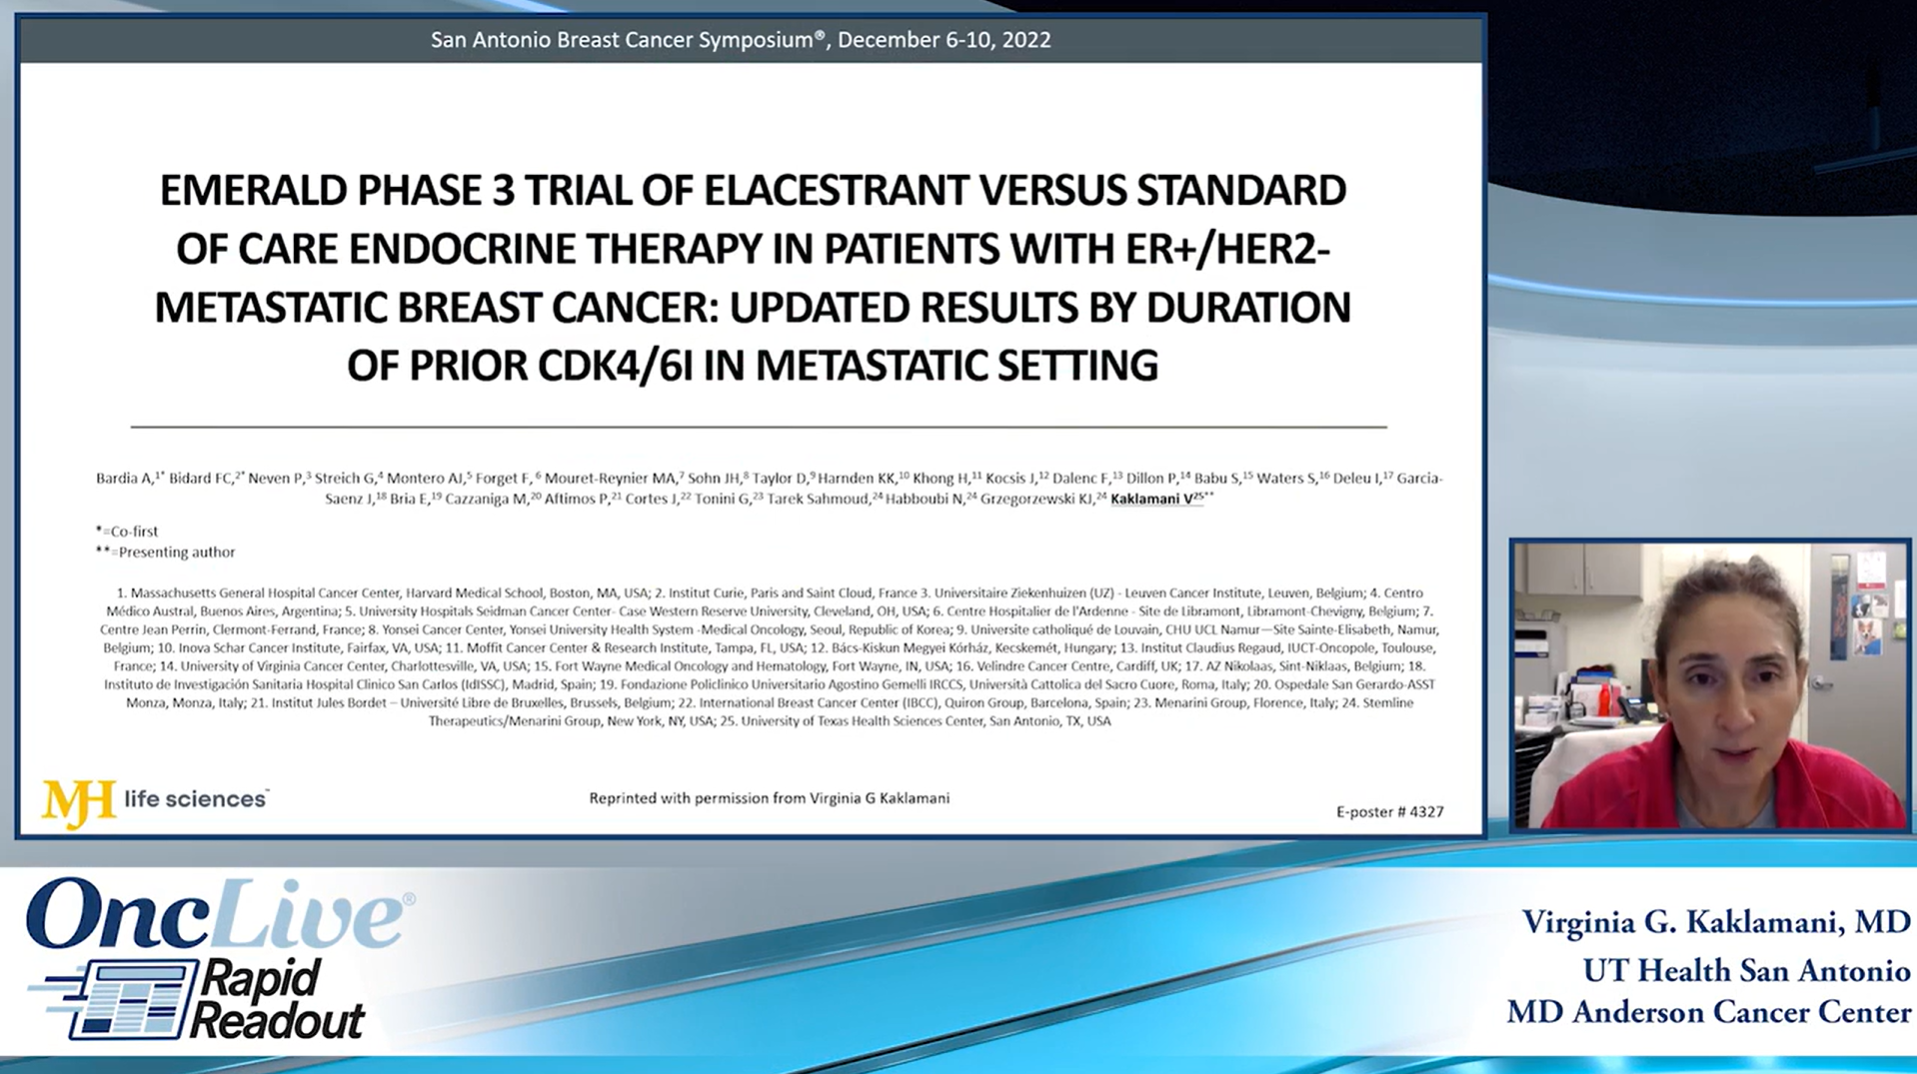 EMERALD Phase 3 Trial of Elacestrant Versus Standard of Care Endocrine Therapy in Patients With ER+/HER2- Metastatic Breast Cancer: Updated Results by Duration of Prior CDK4/6i in Metastatic Setting 